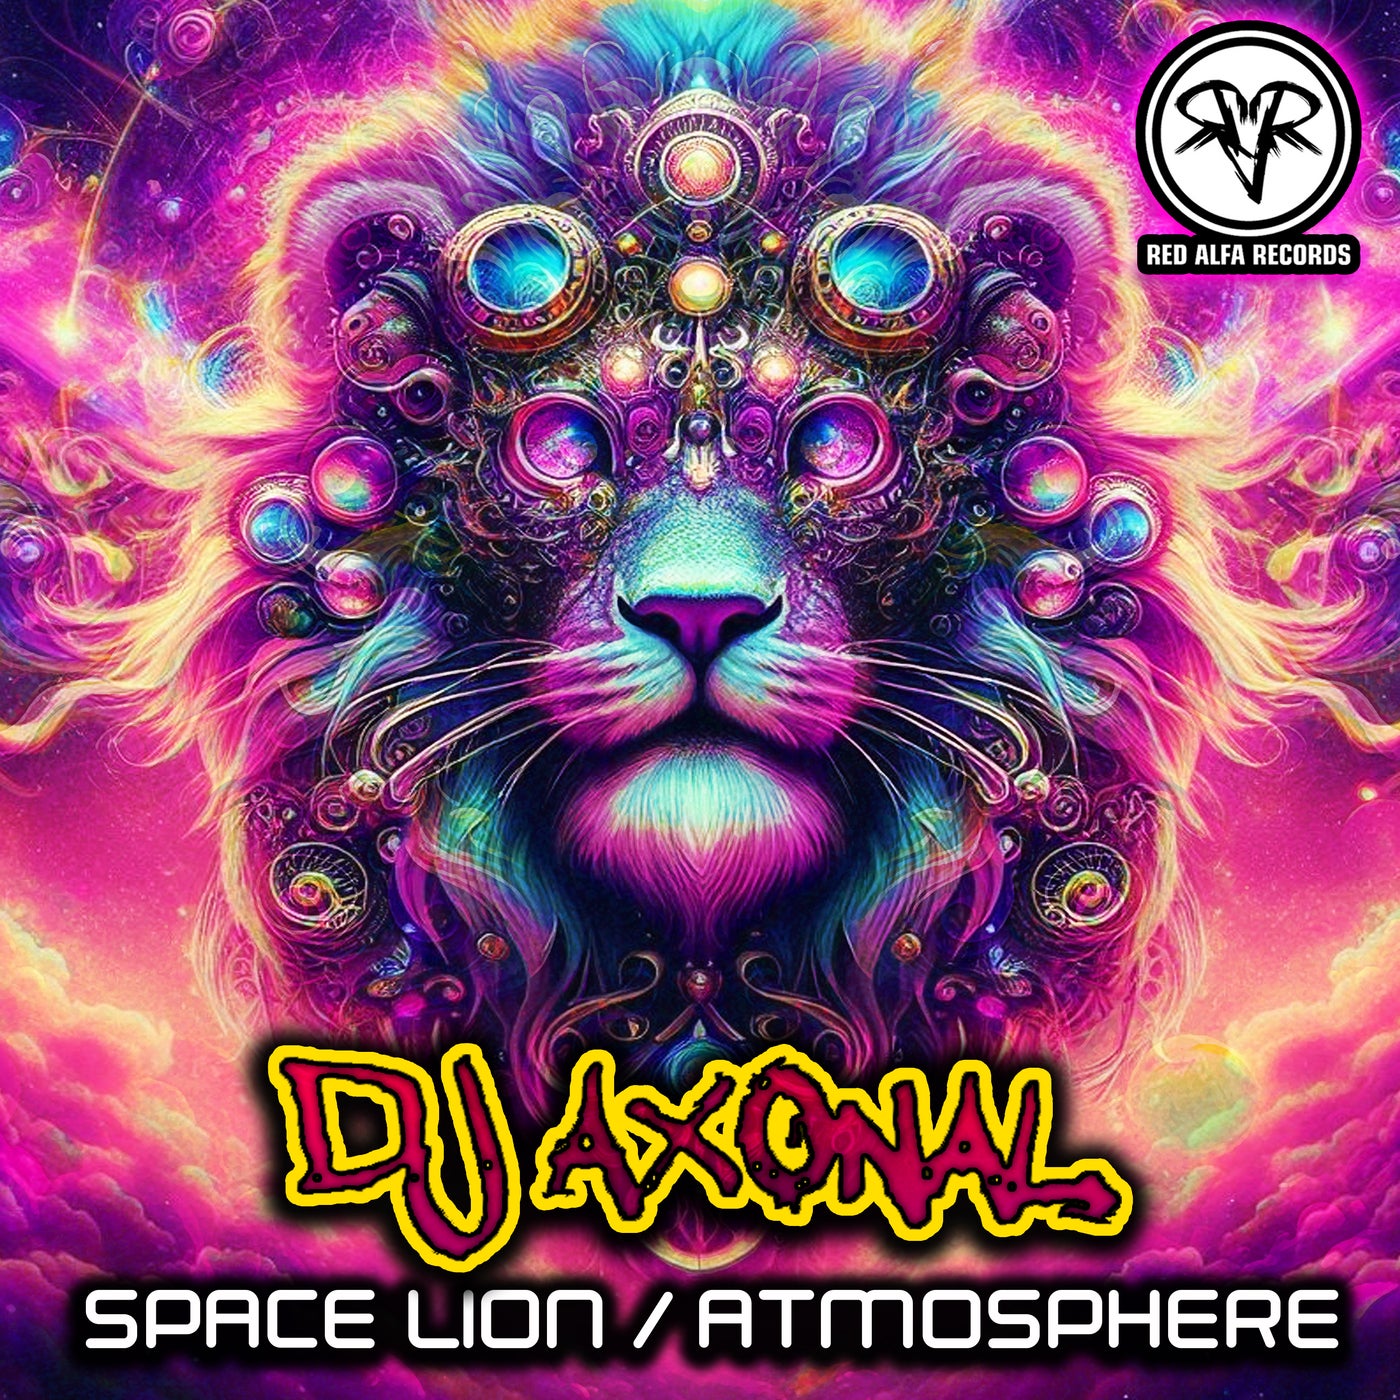 Space Lion & Atmosphere